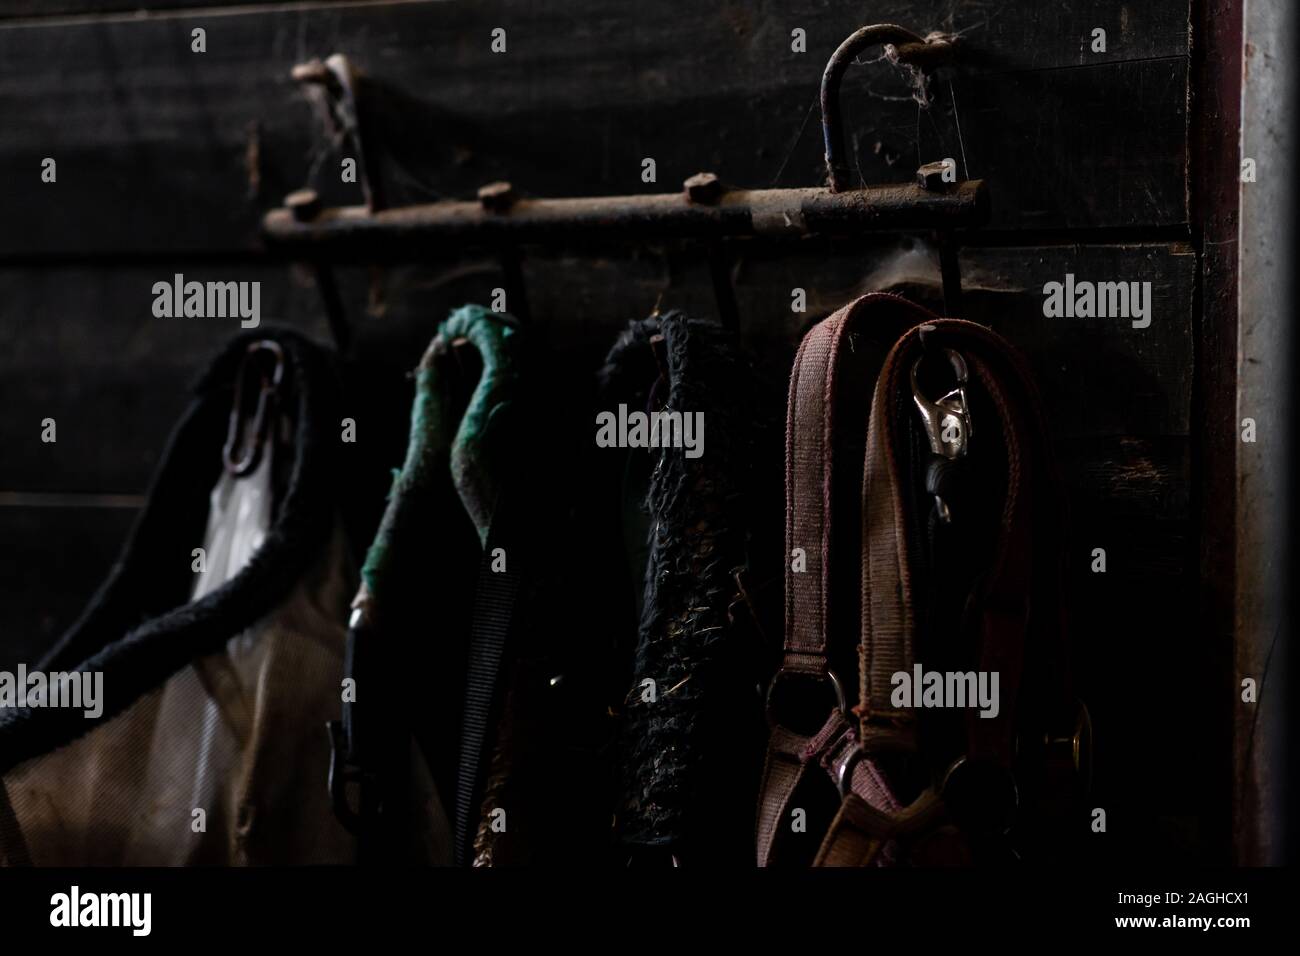 Colour landscape image shot with a low-key exposure of riding tack inside a horse barn in winter. Stock Photo